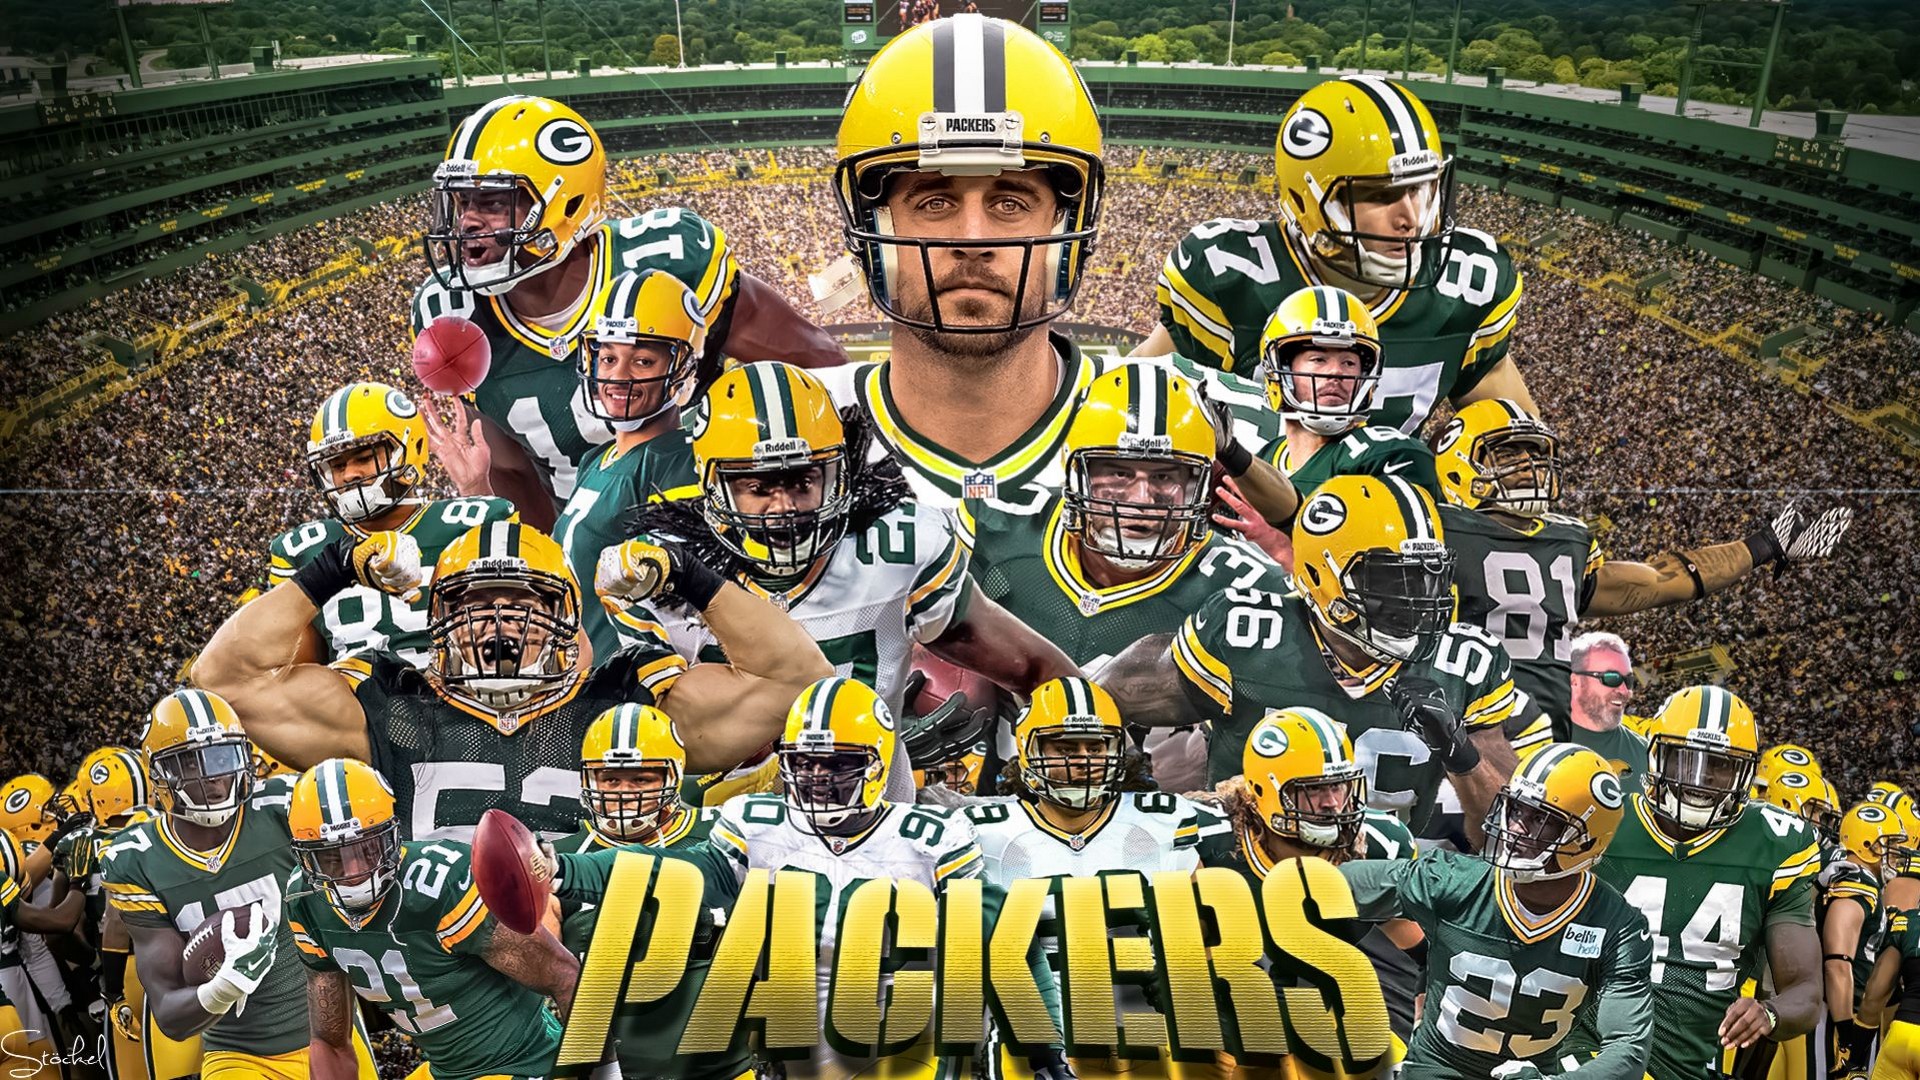 Green Bay Packers Wallpaper for Computer with high-resolution 1920x1080 pixel. Download and set as wallpaper for Desktop Computer, Apple iPhone X, XS Max, XR, 8, 7, 6, SE, iPad, Android